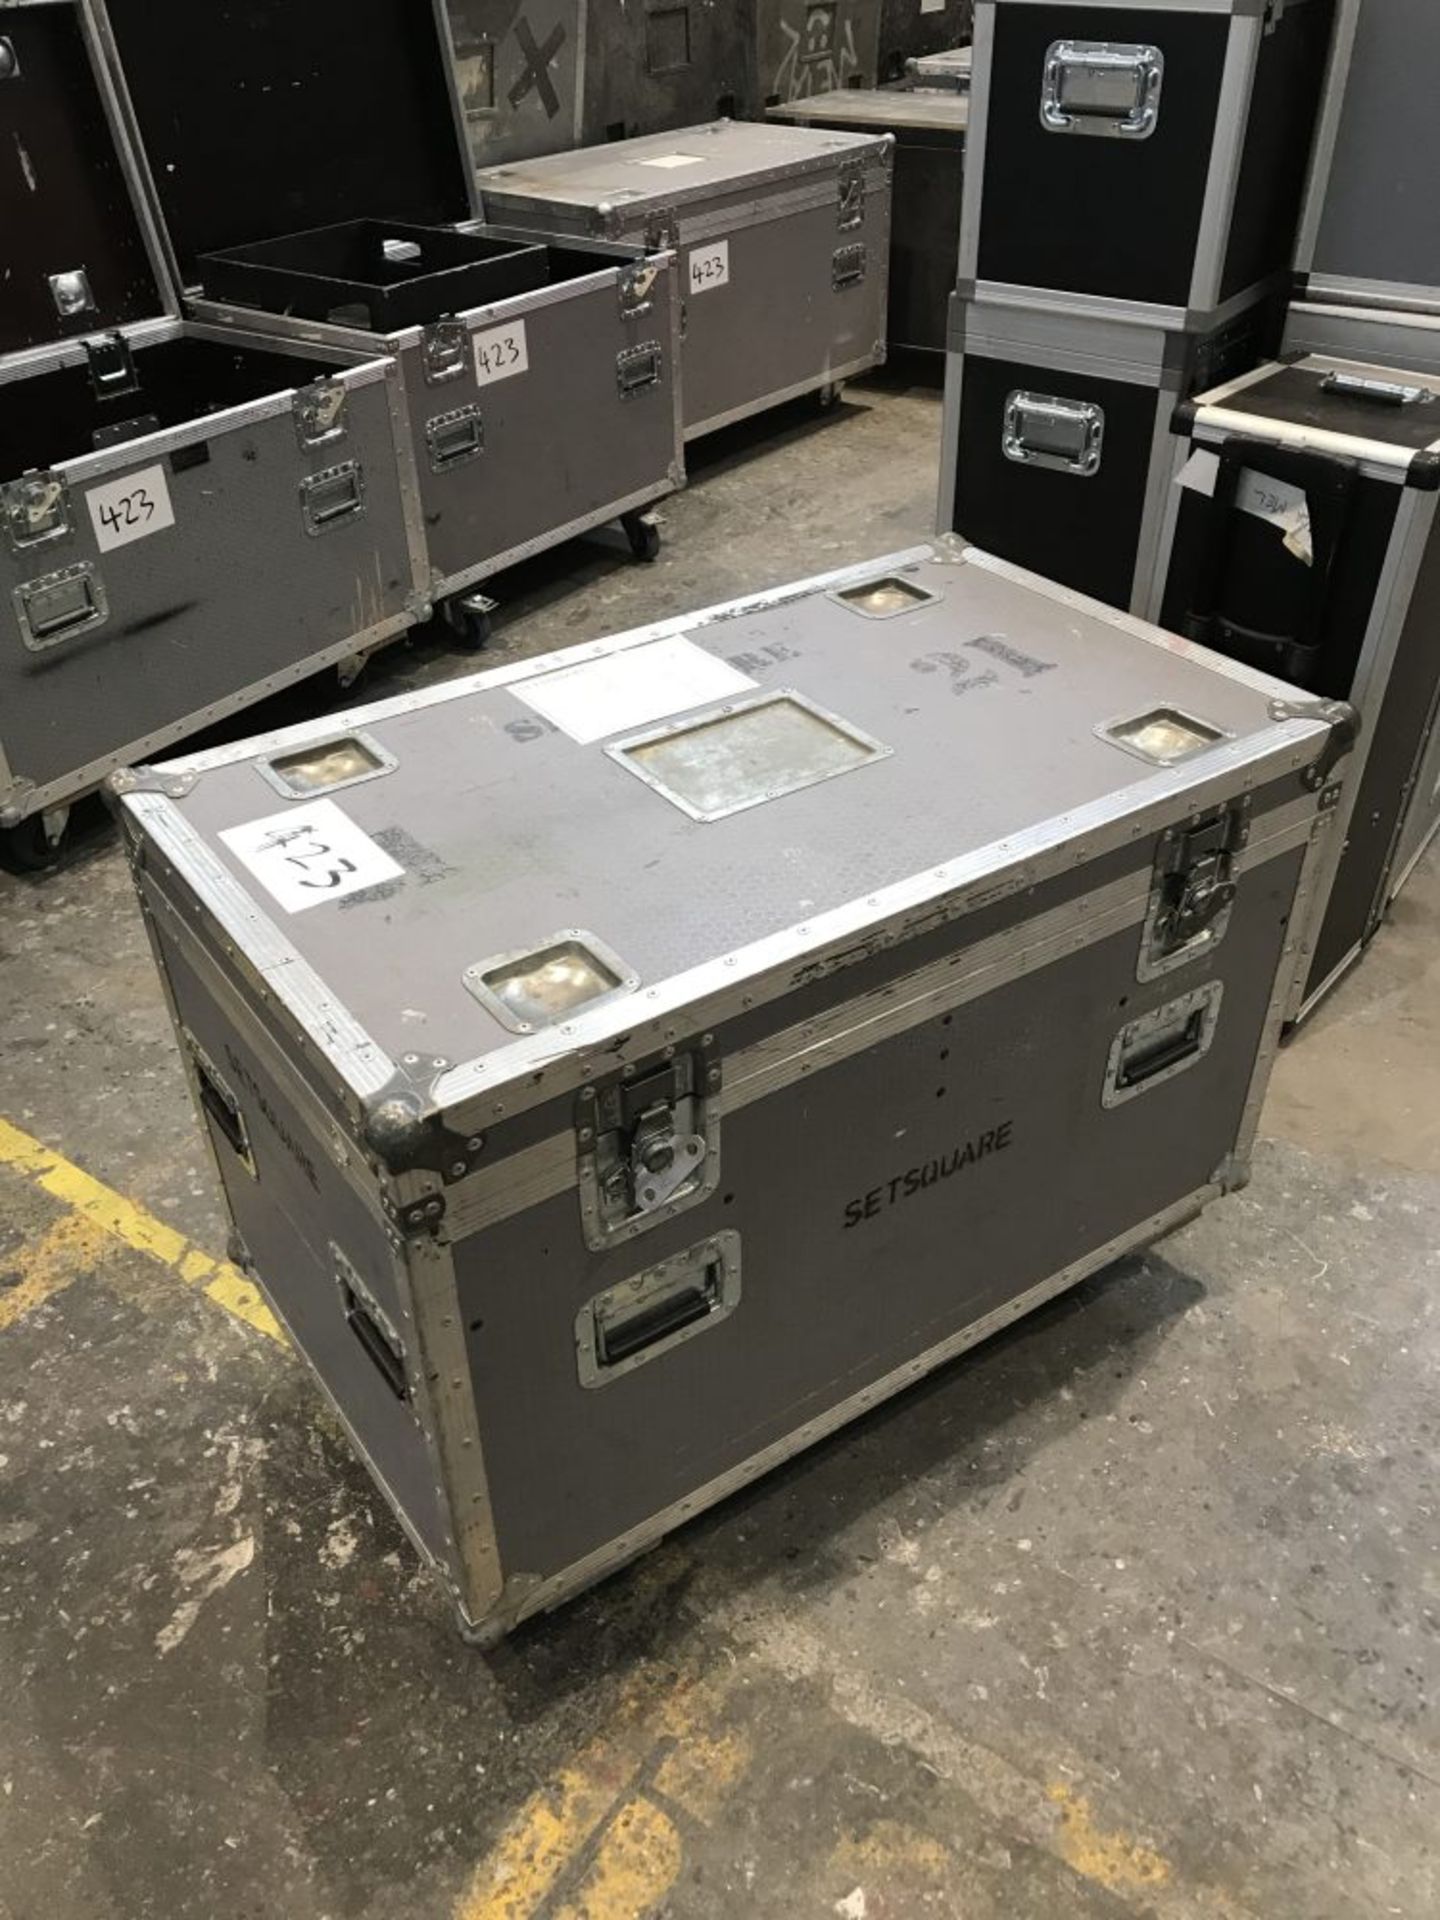 7 site storage flight cases on casters and 2 ply cabinets on casters with contents if any - Image 9 of 10